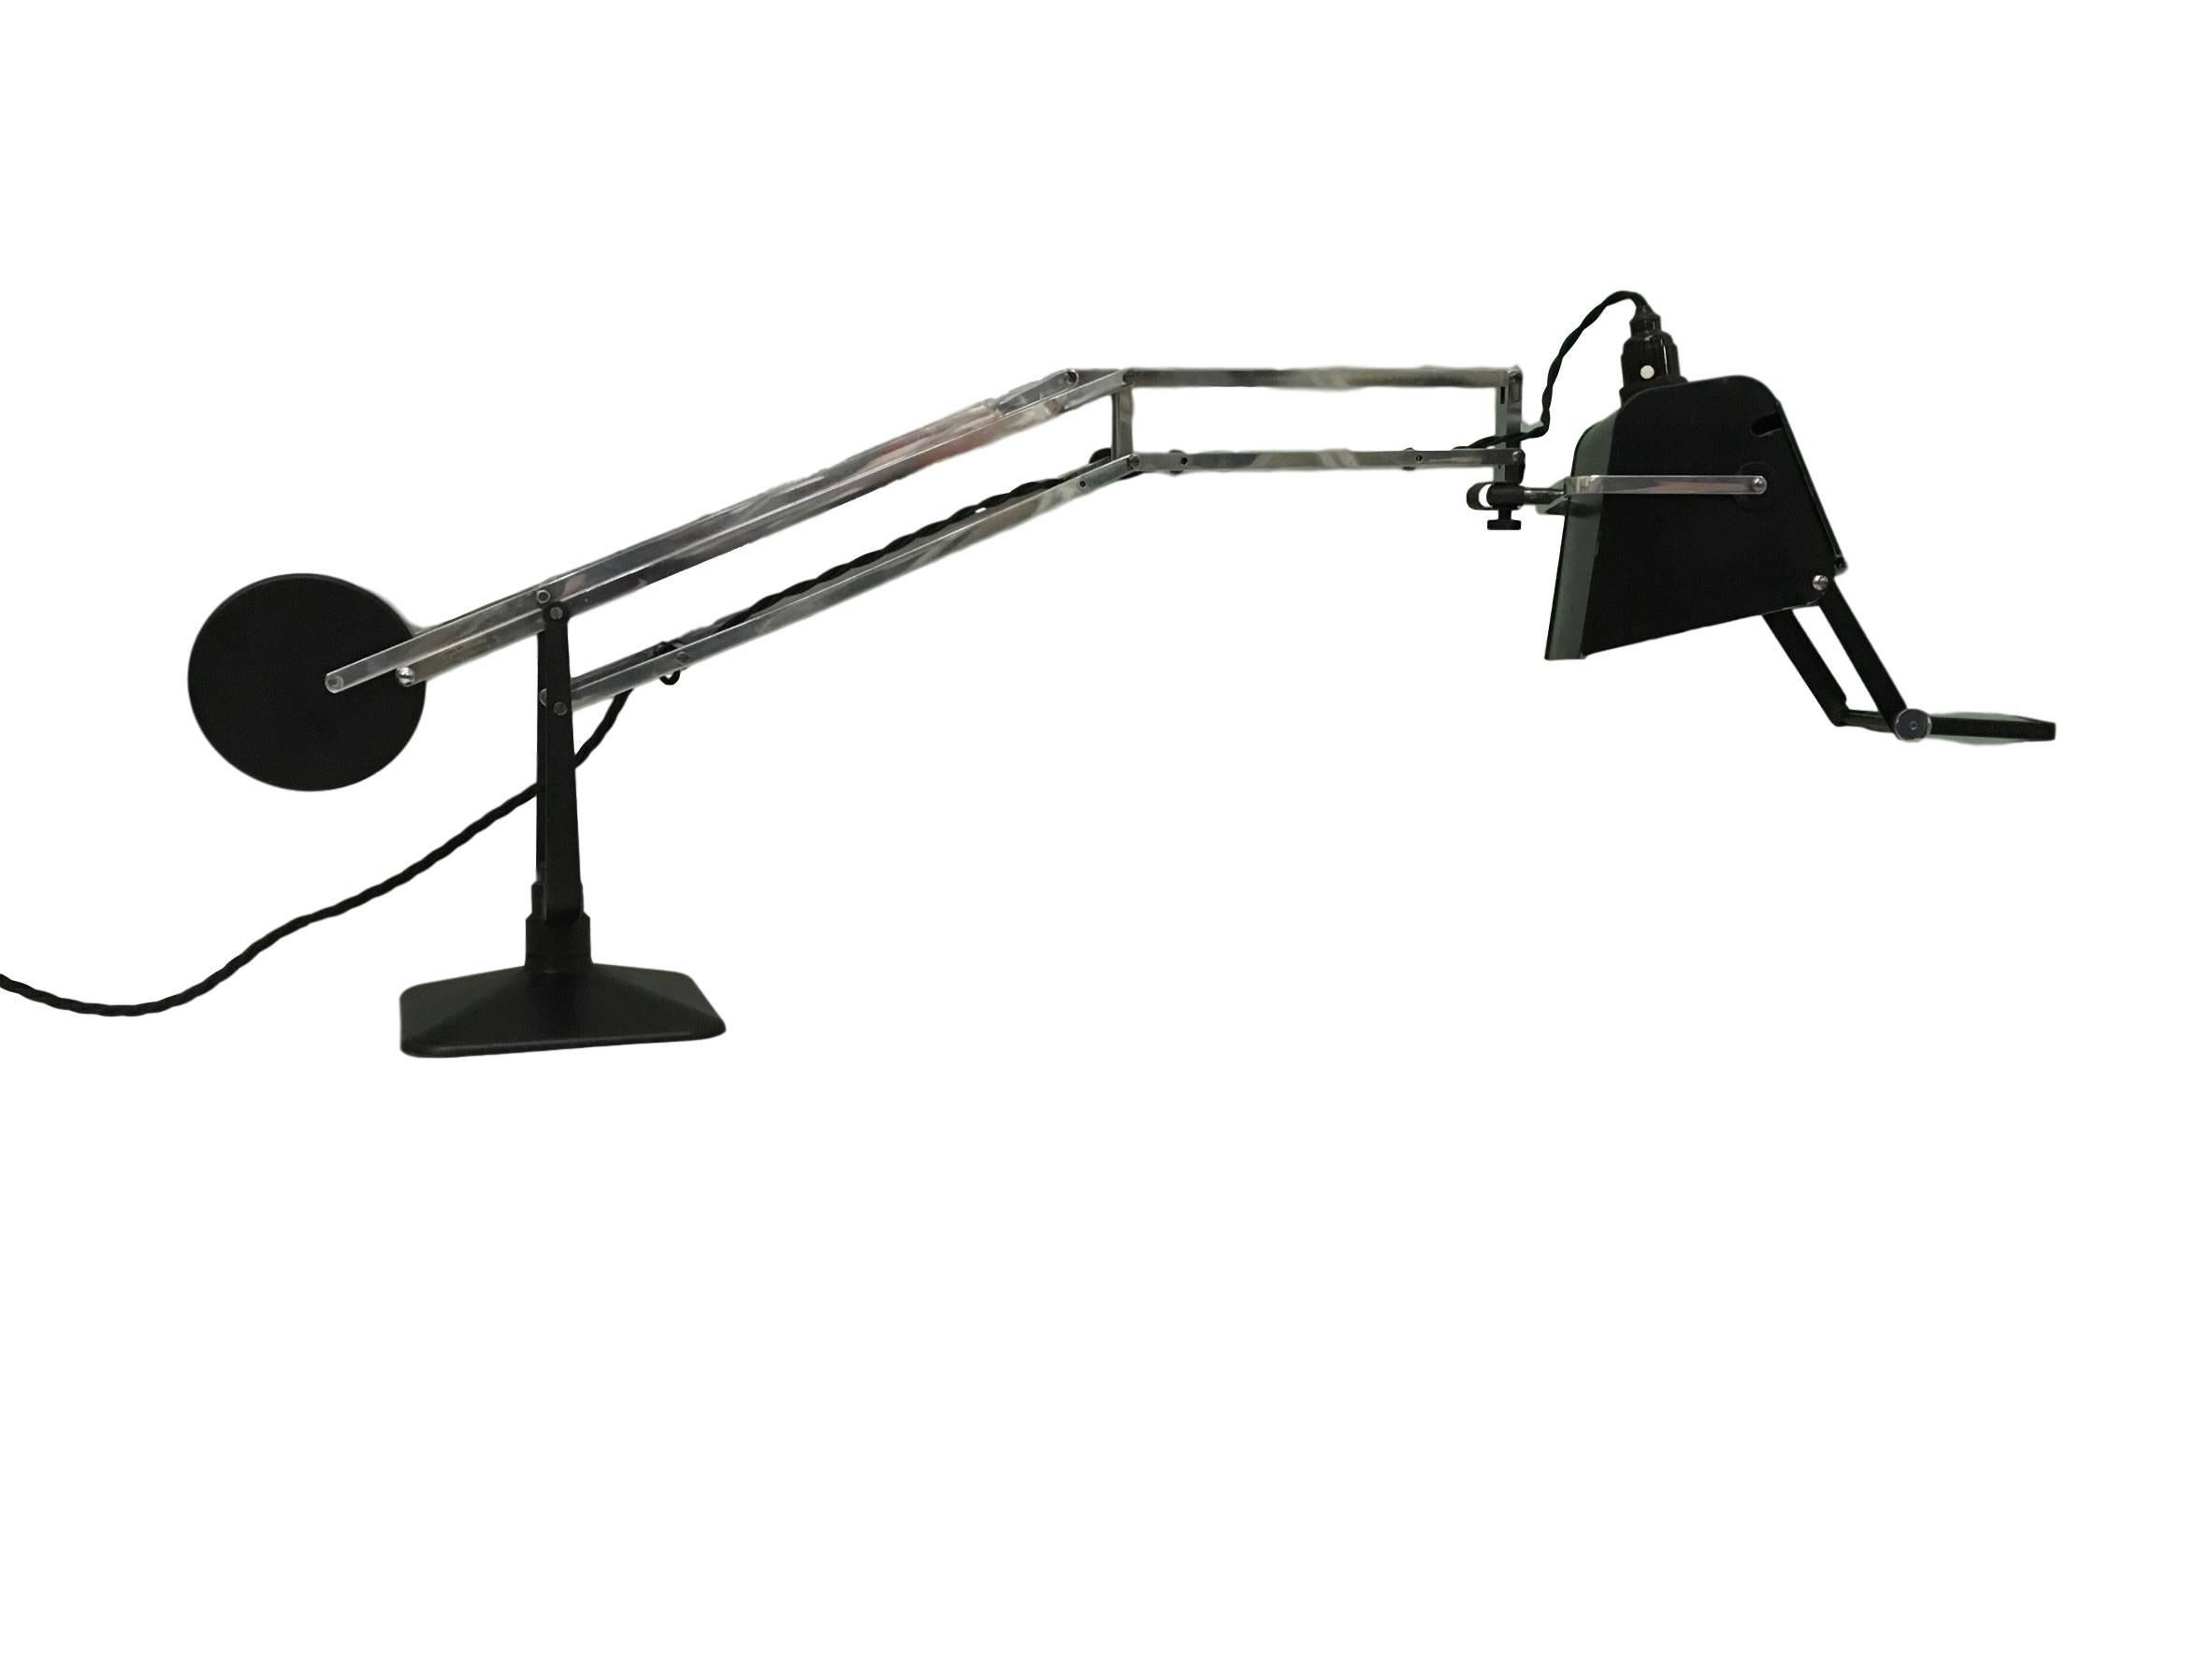 A rare original Hadrill and Horstmann Pluslite magnifying lamp in the largest available size. Dating from the 1930s-1940s, this lamp is in beautifully restored condition.

The armature allows 90 cm/35.4 inches reach in all directions, thanks to